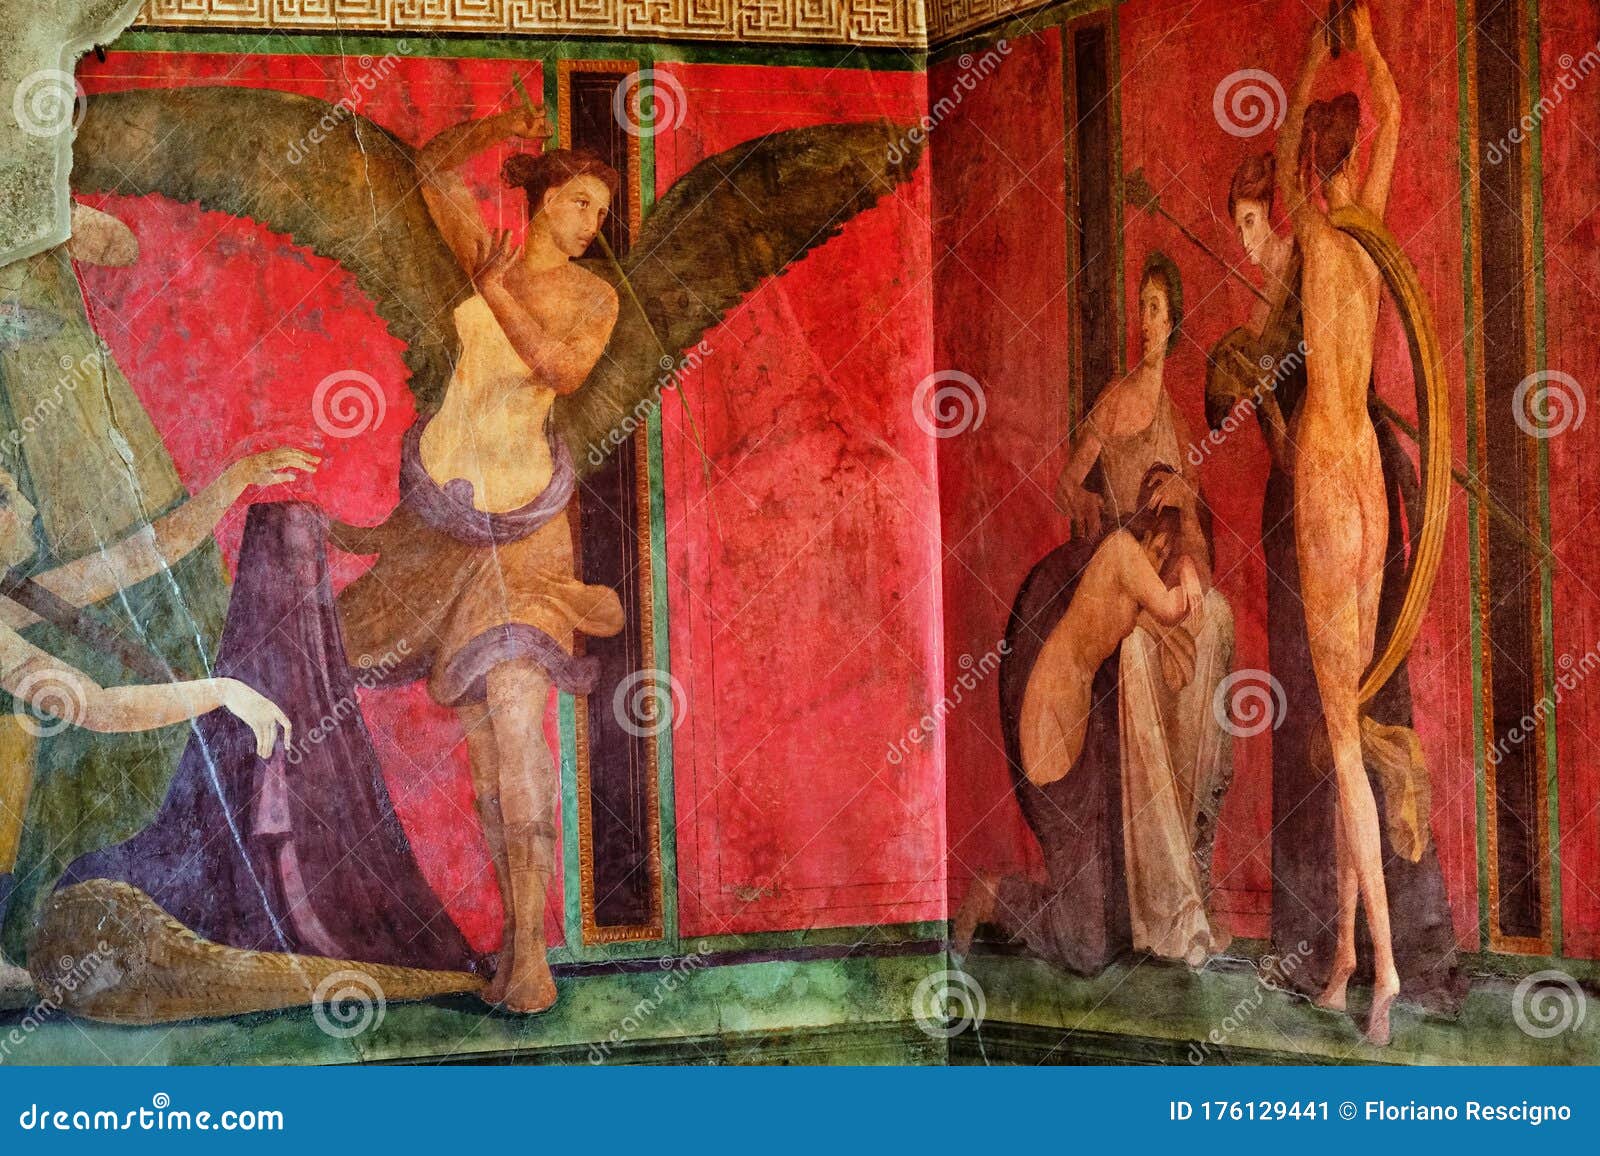 ancient roman fresco in pompeii showing a detail of the mystery cult of dionysus